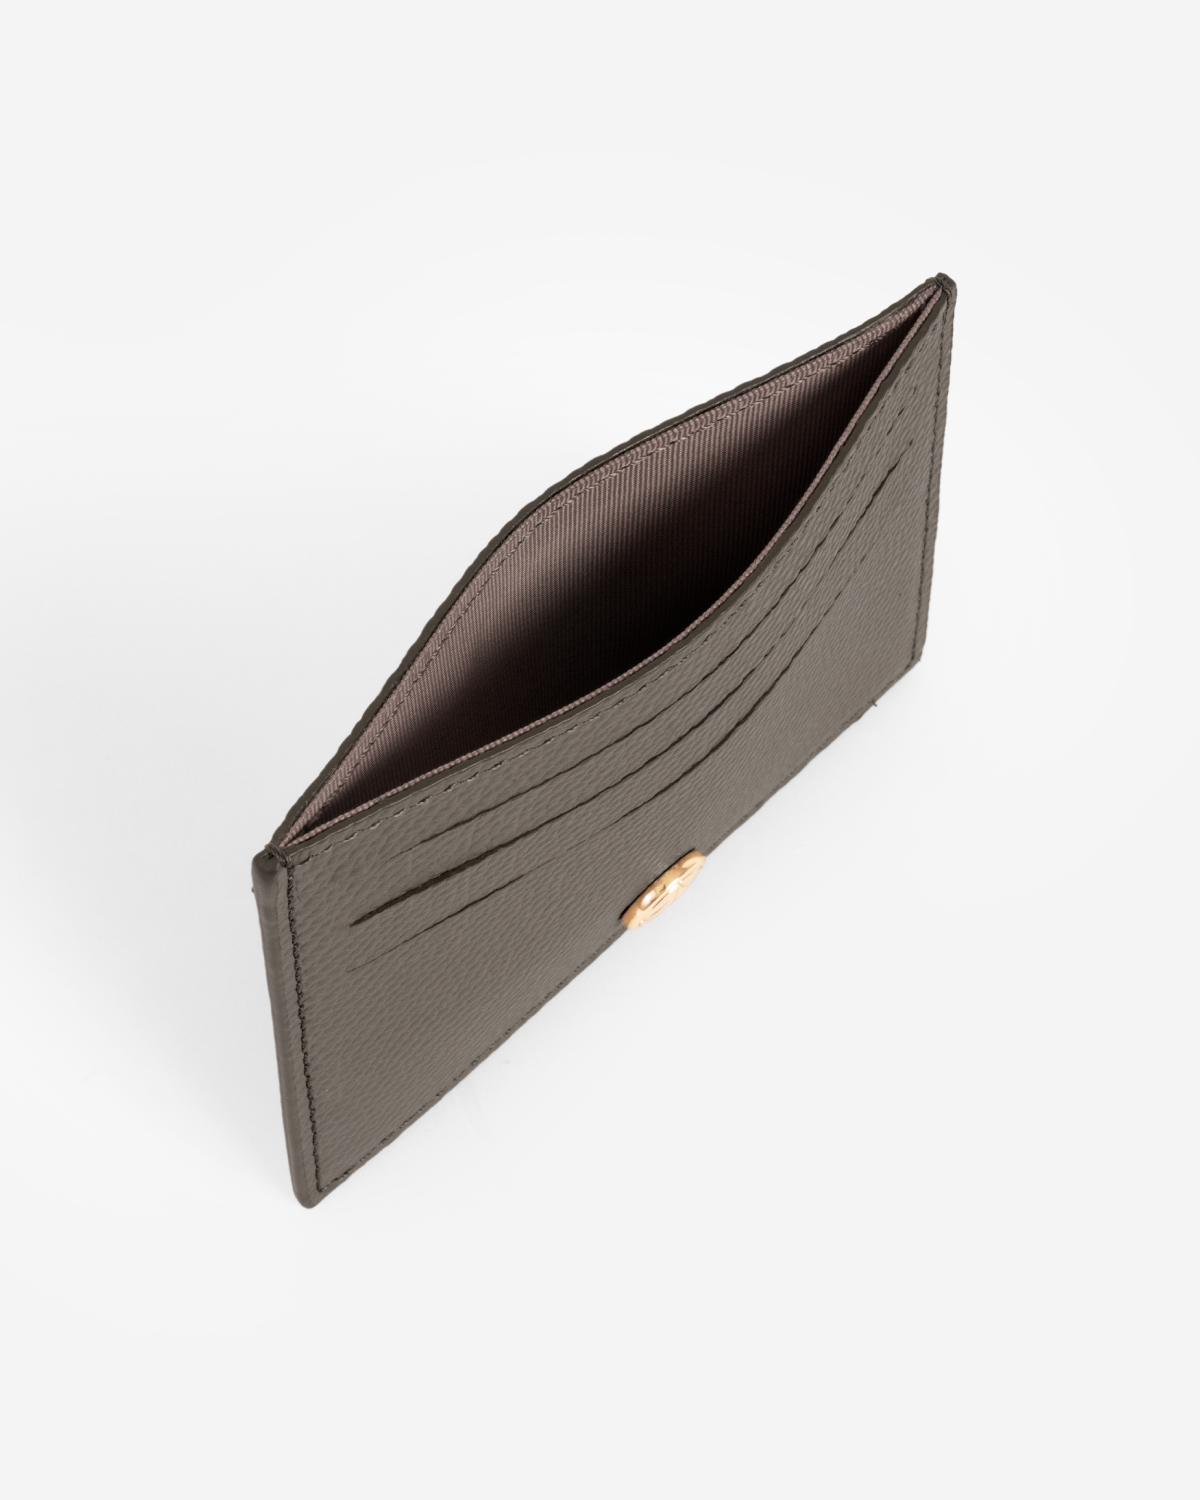 VERA Petite Card Holder in Frosted Gray